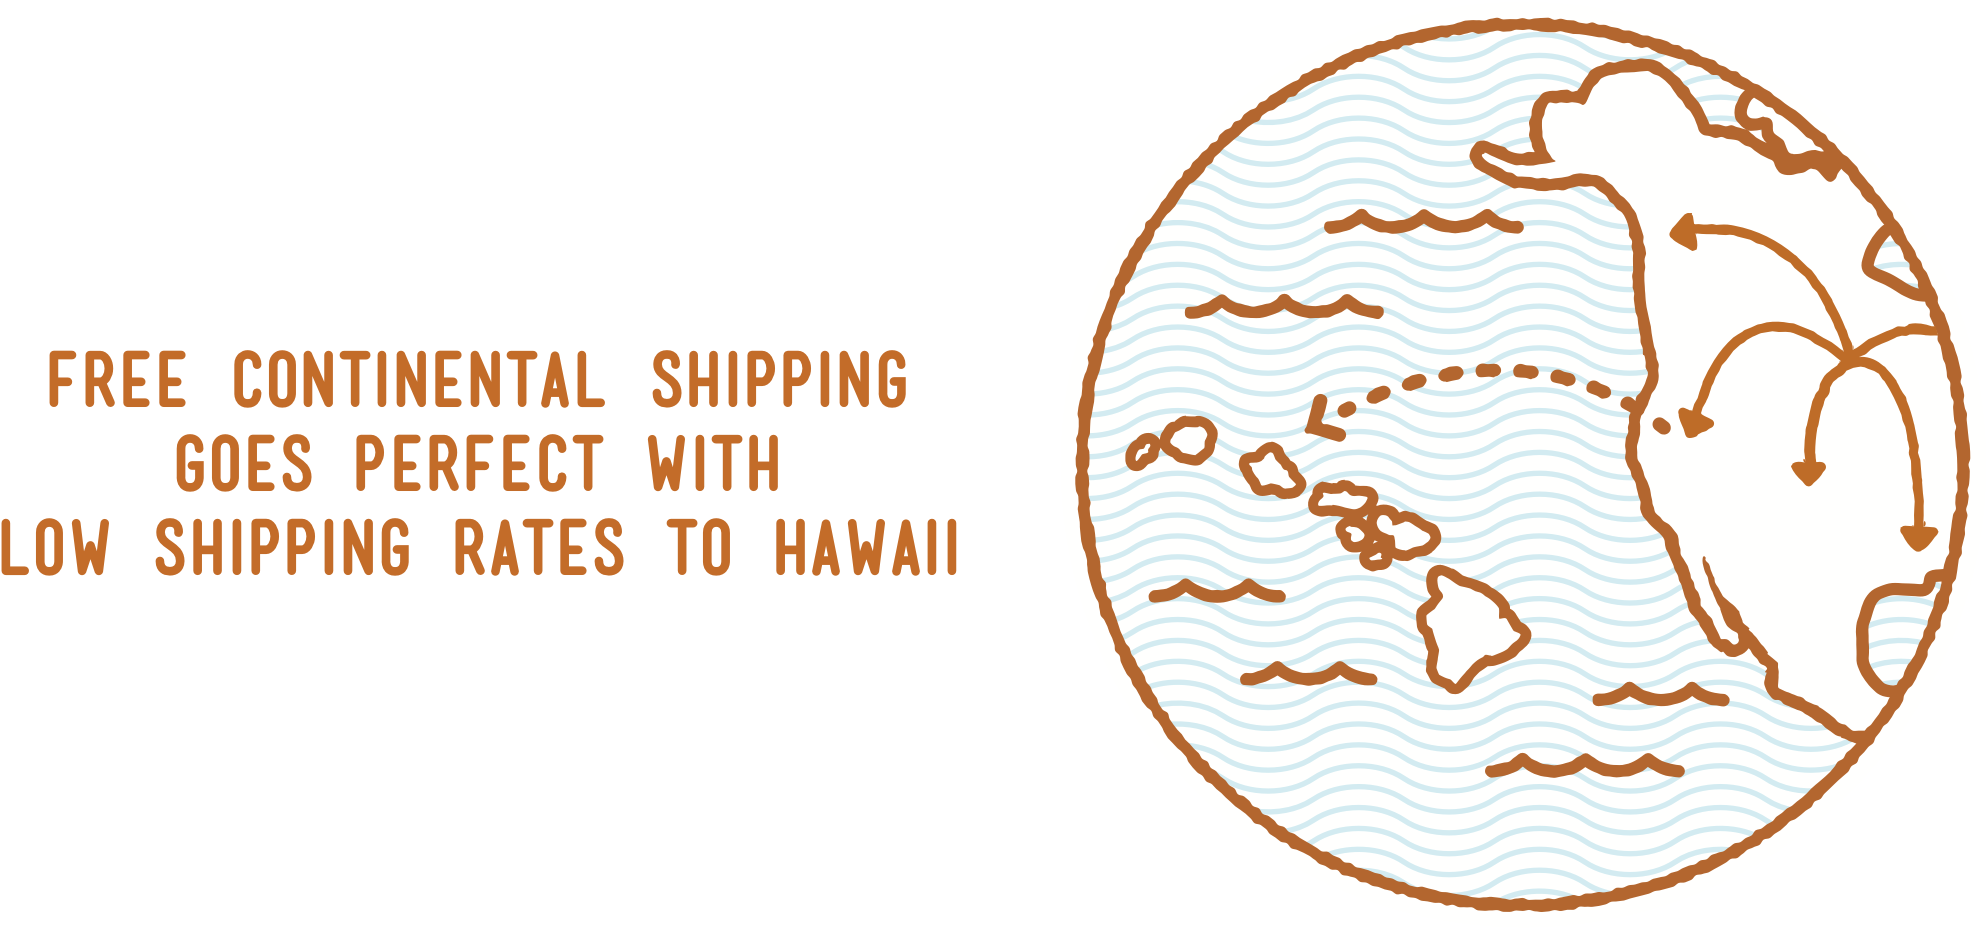 Free Mainland Shipping goes perfect with Low Shipping Rates to Hawaii